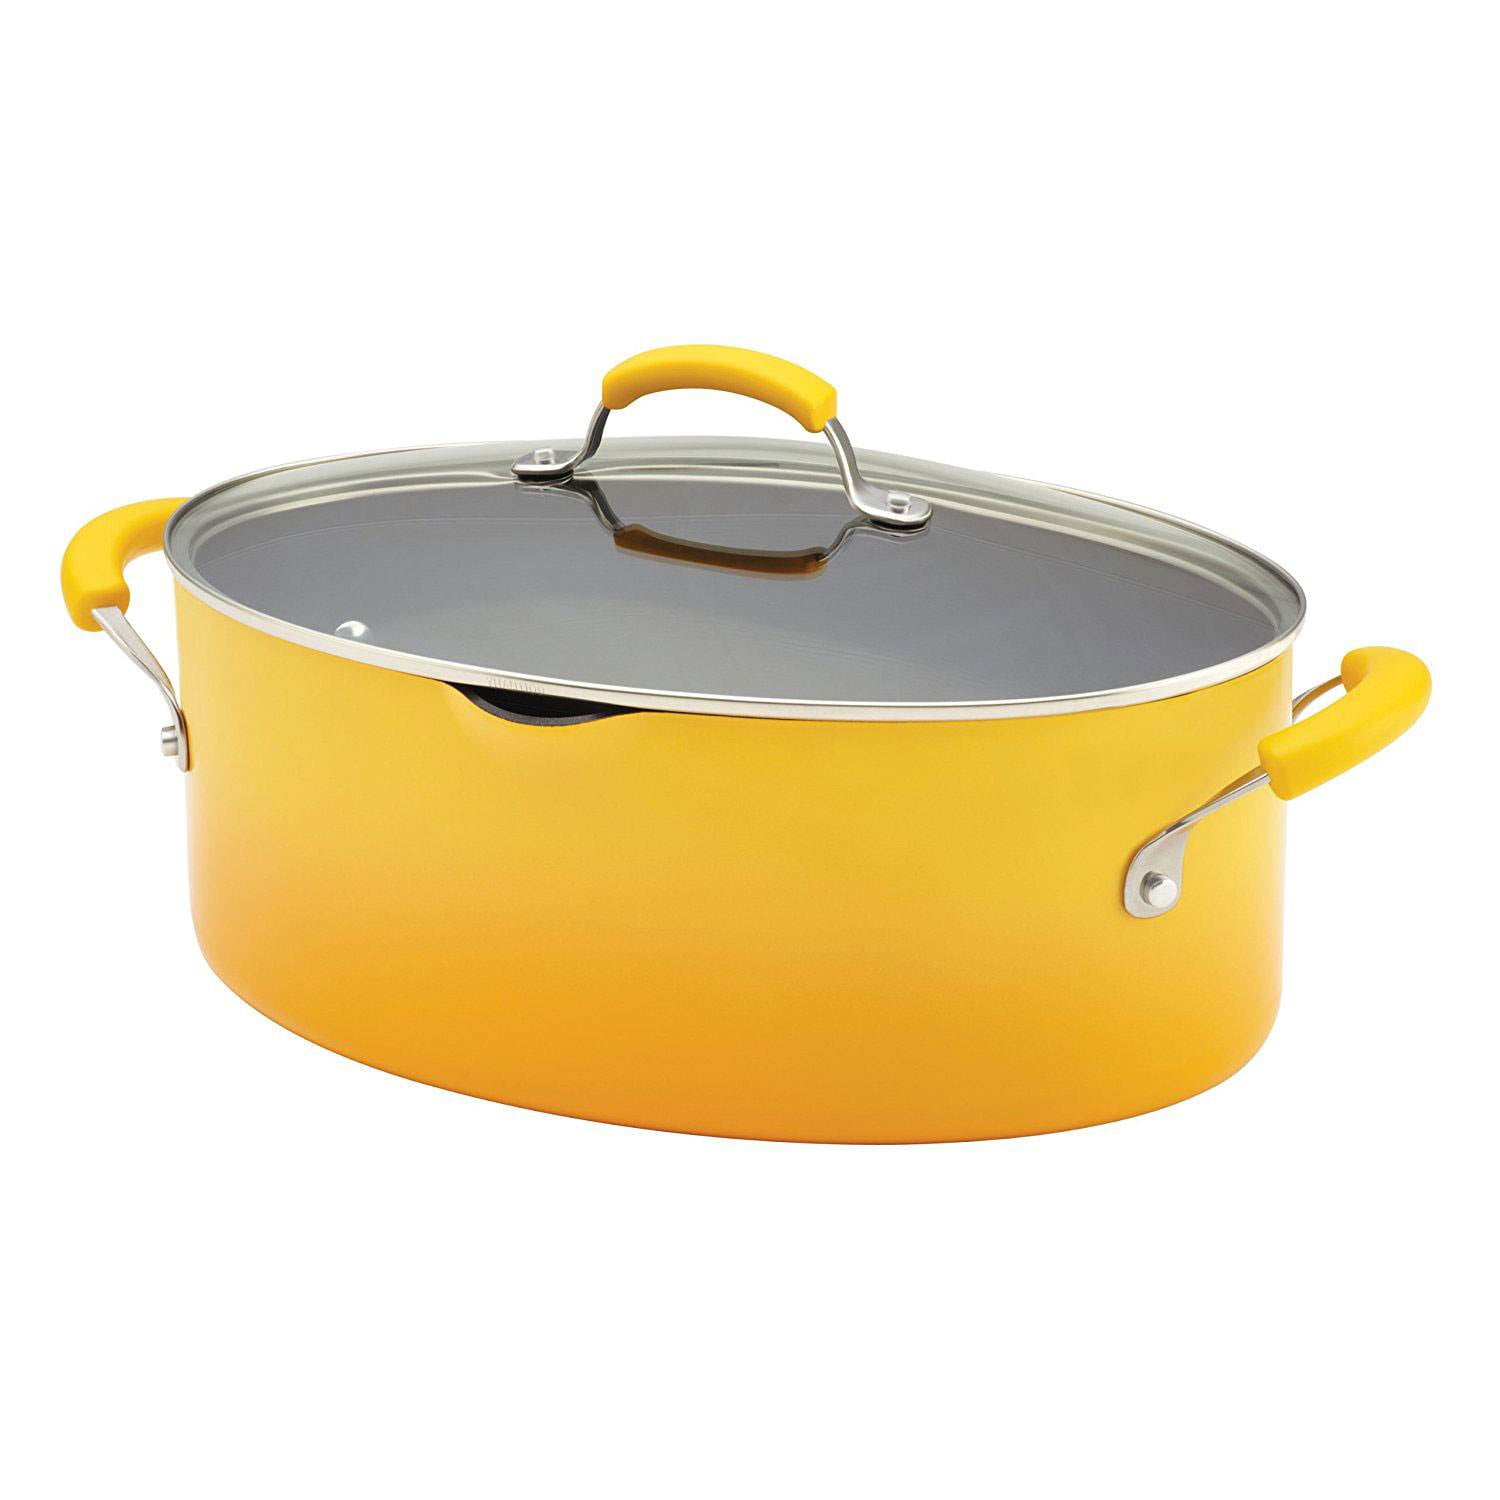 Rachael Ray Hard Anodized Nonstick Oval Pasta Pot / Stockpot with Lid and  Pour Spout - 8 Quart & Reviews